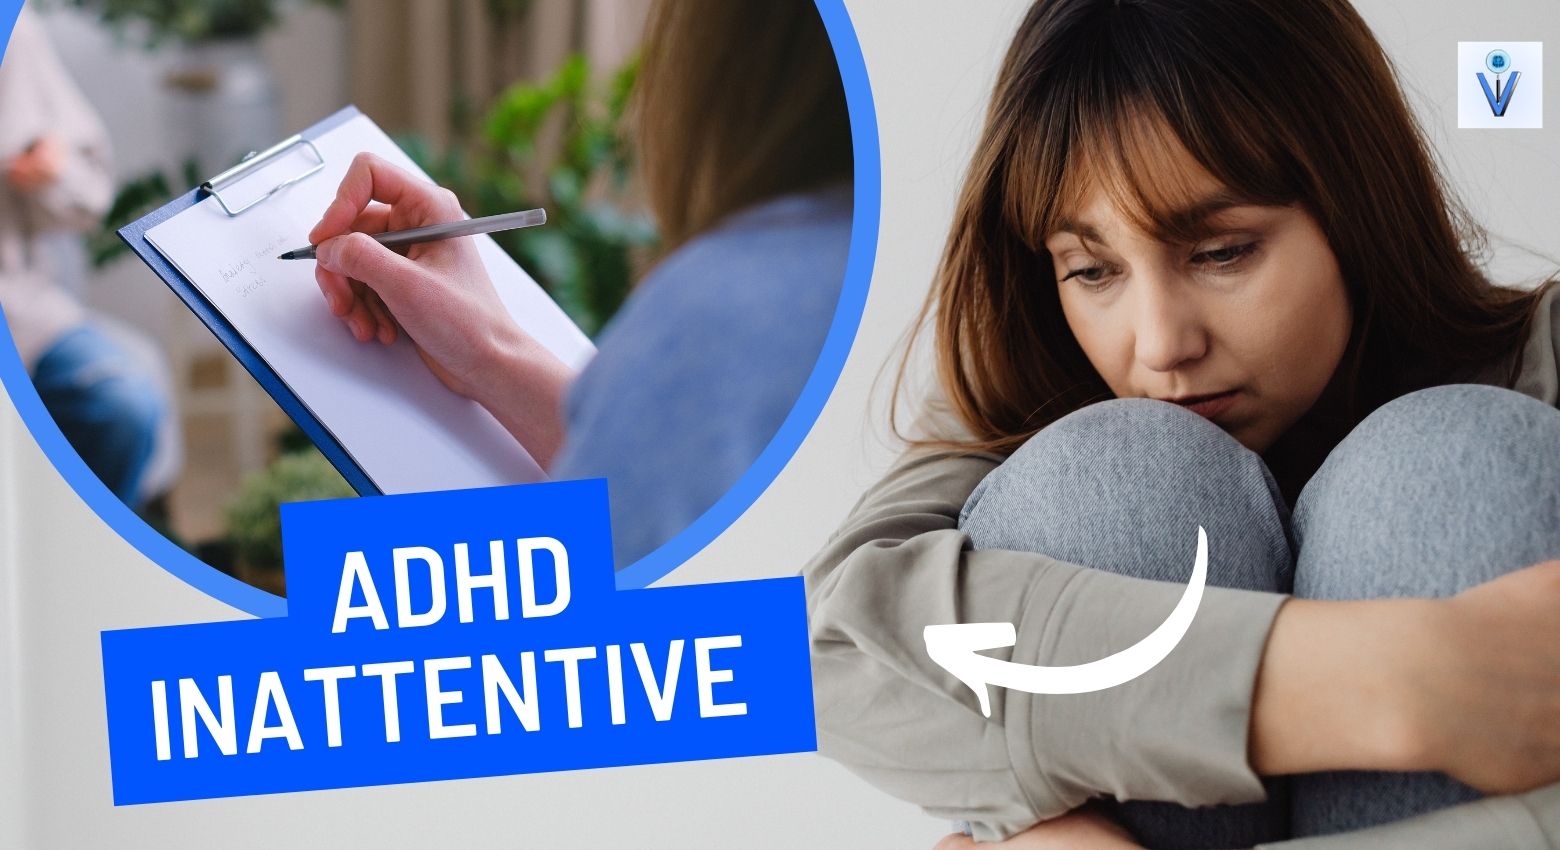 Everything you need to know about ADHD inattentive - VARDS